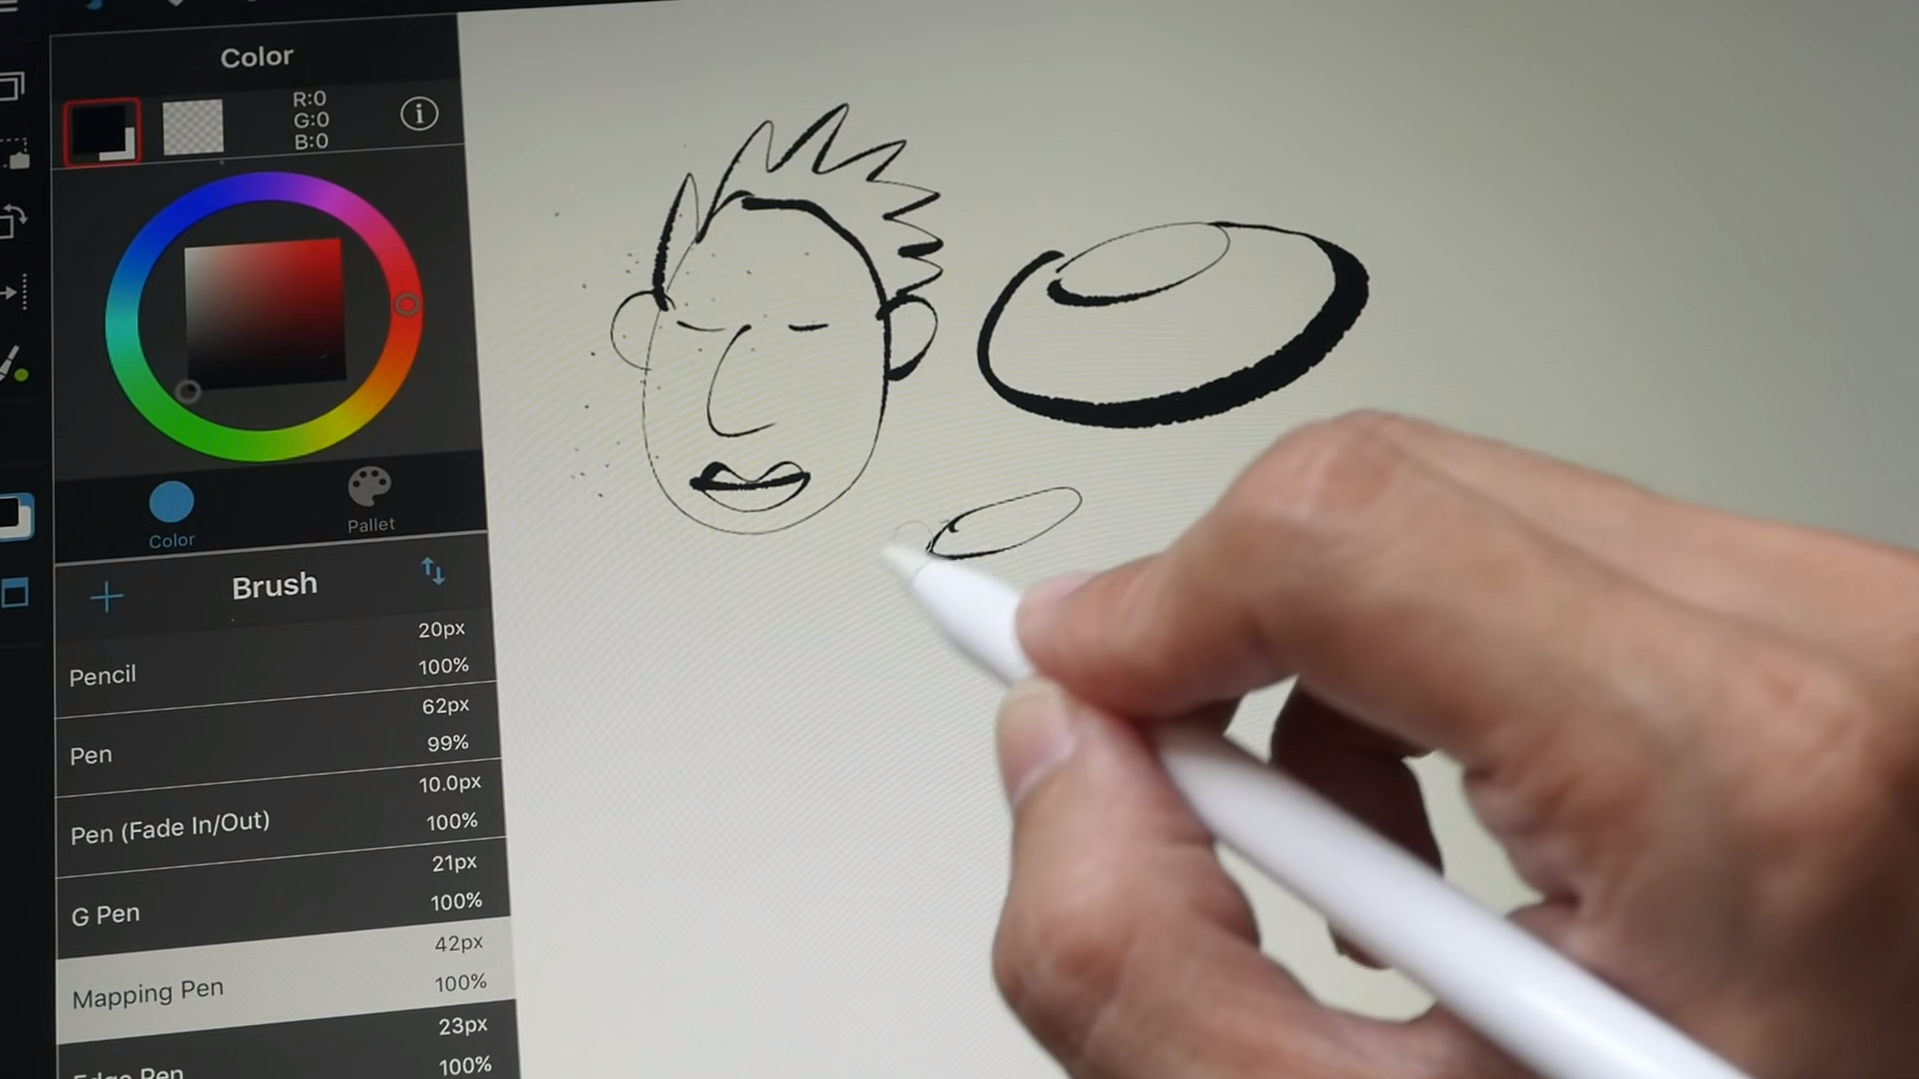 What Tools are Used for Drawing?